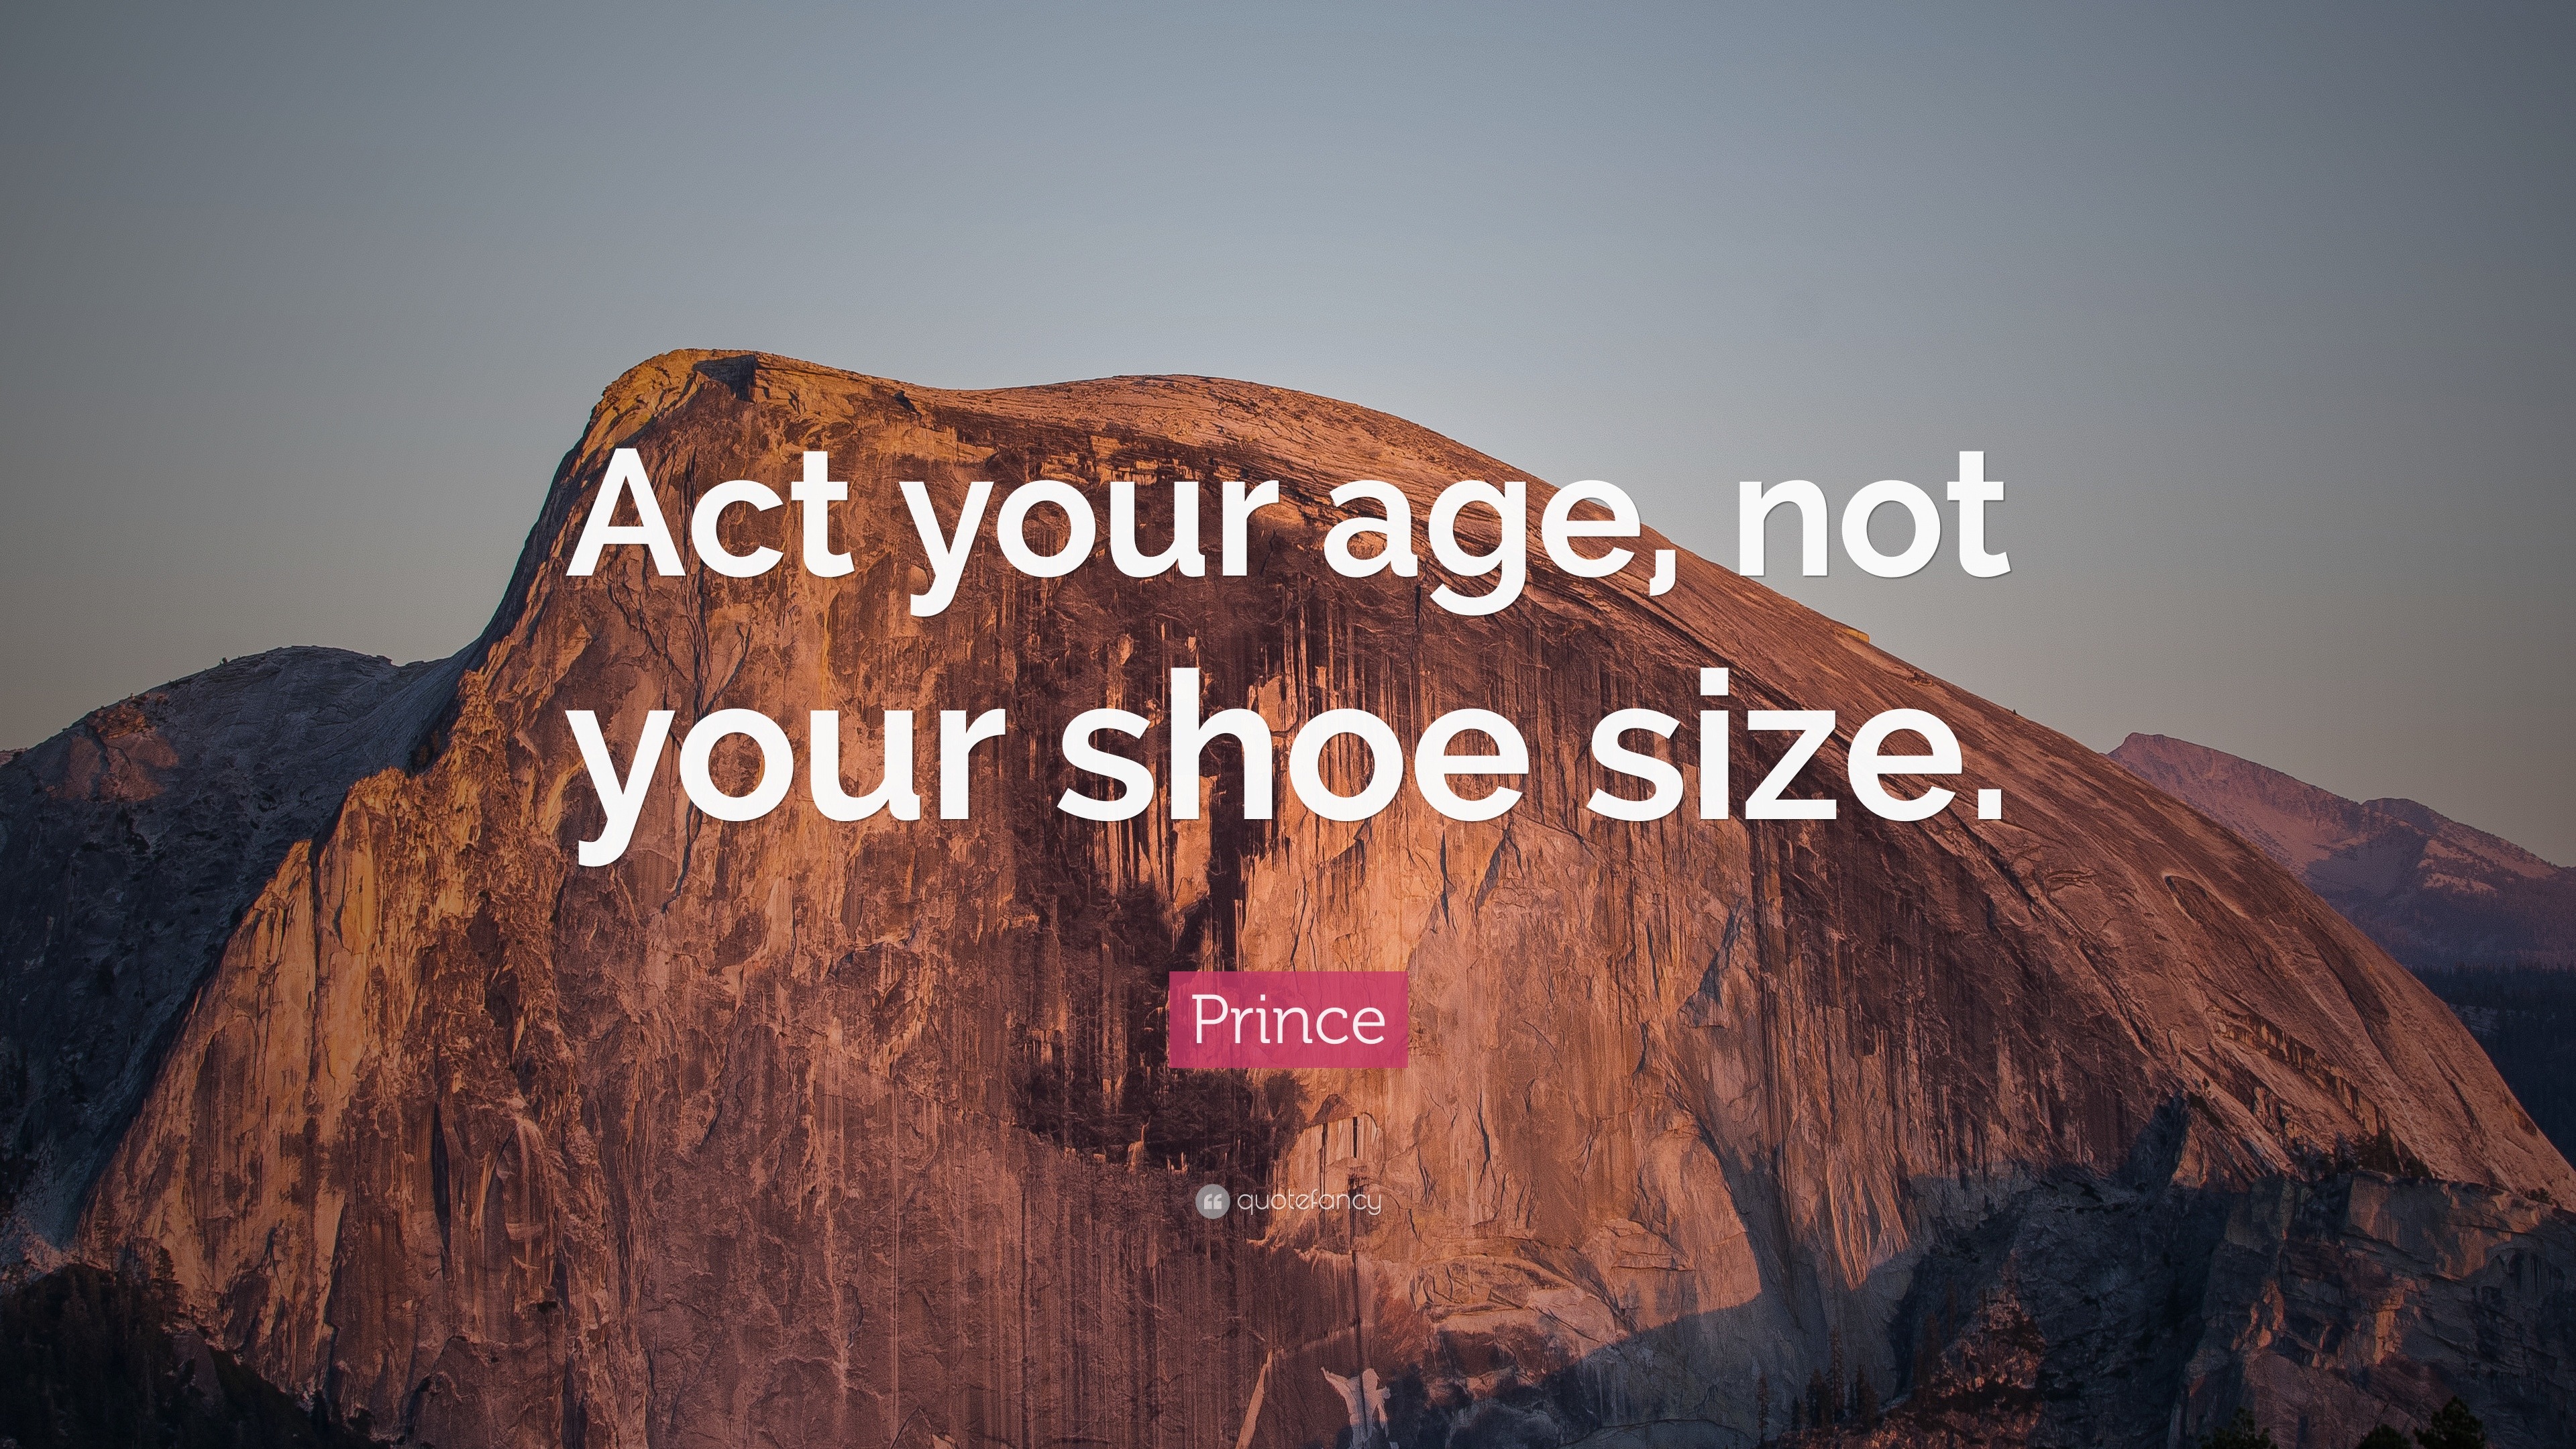 Prince Quote: “Act your age, not your shoe size.”